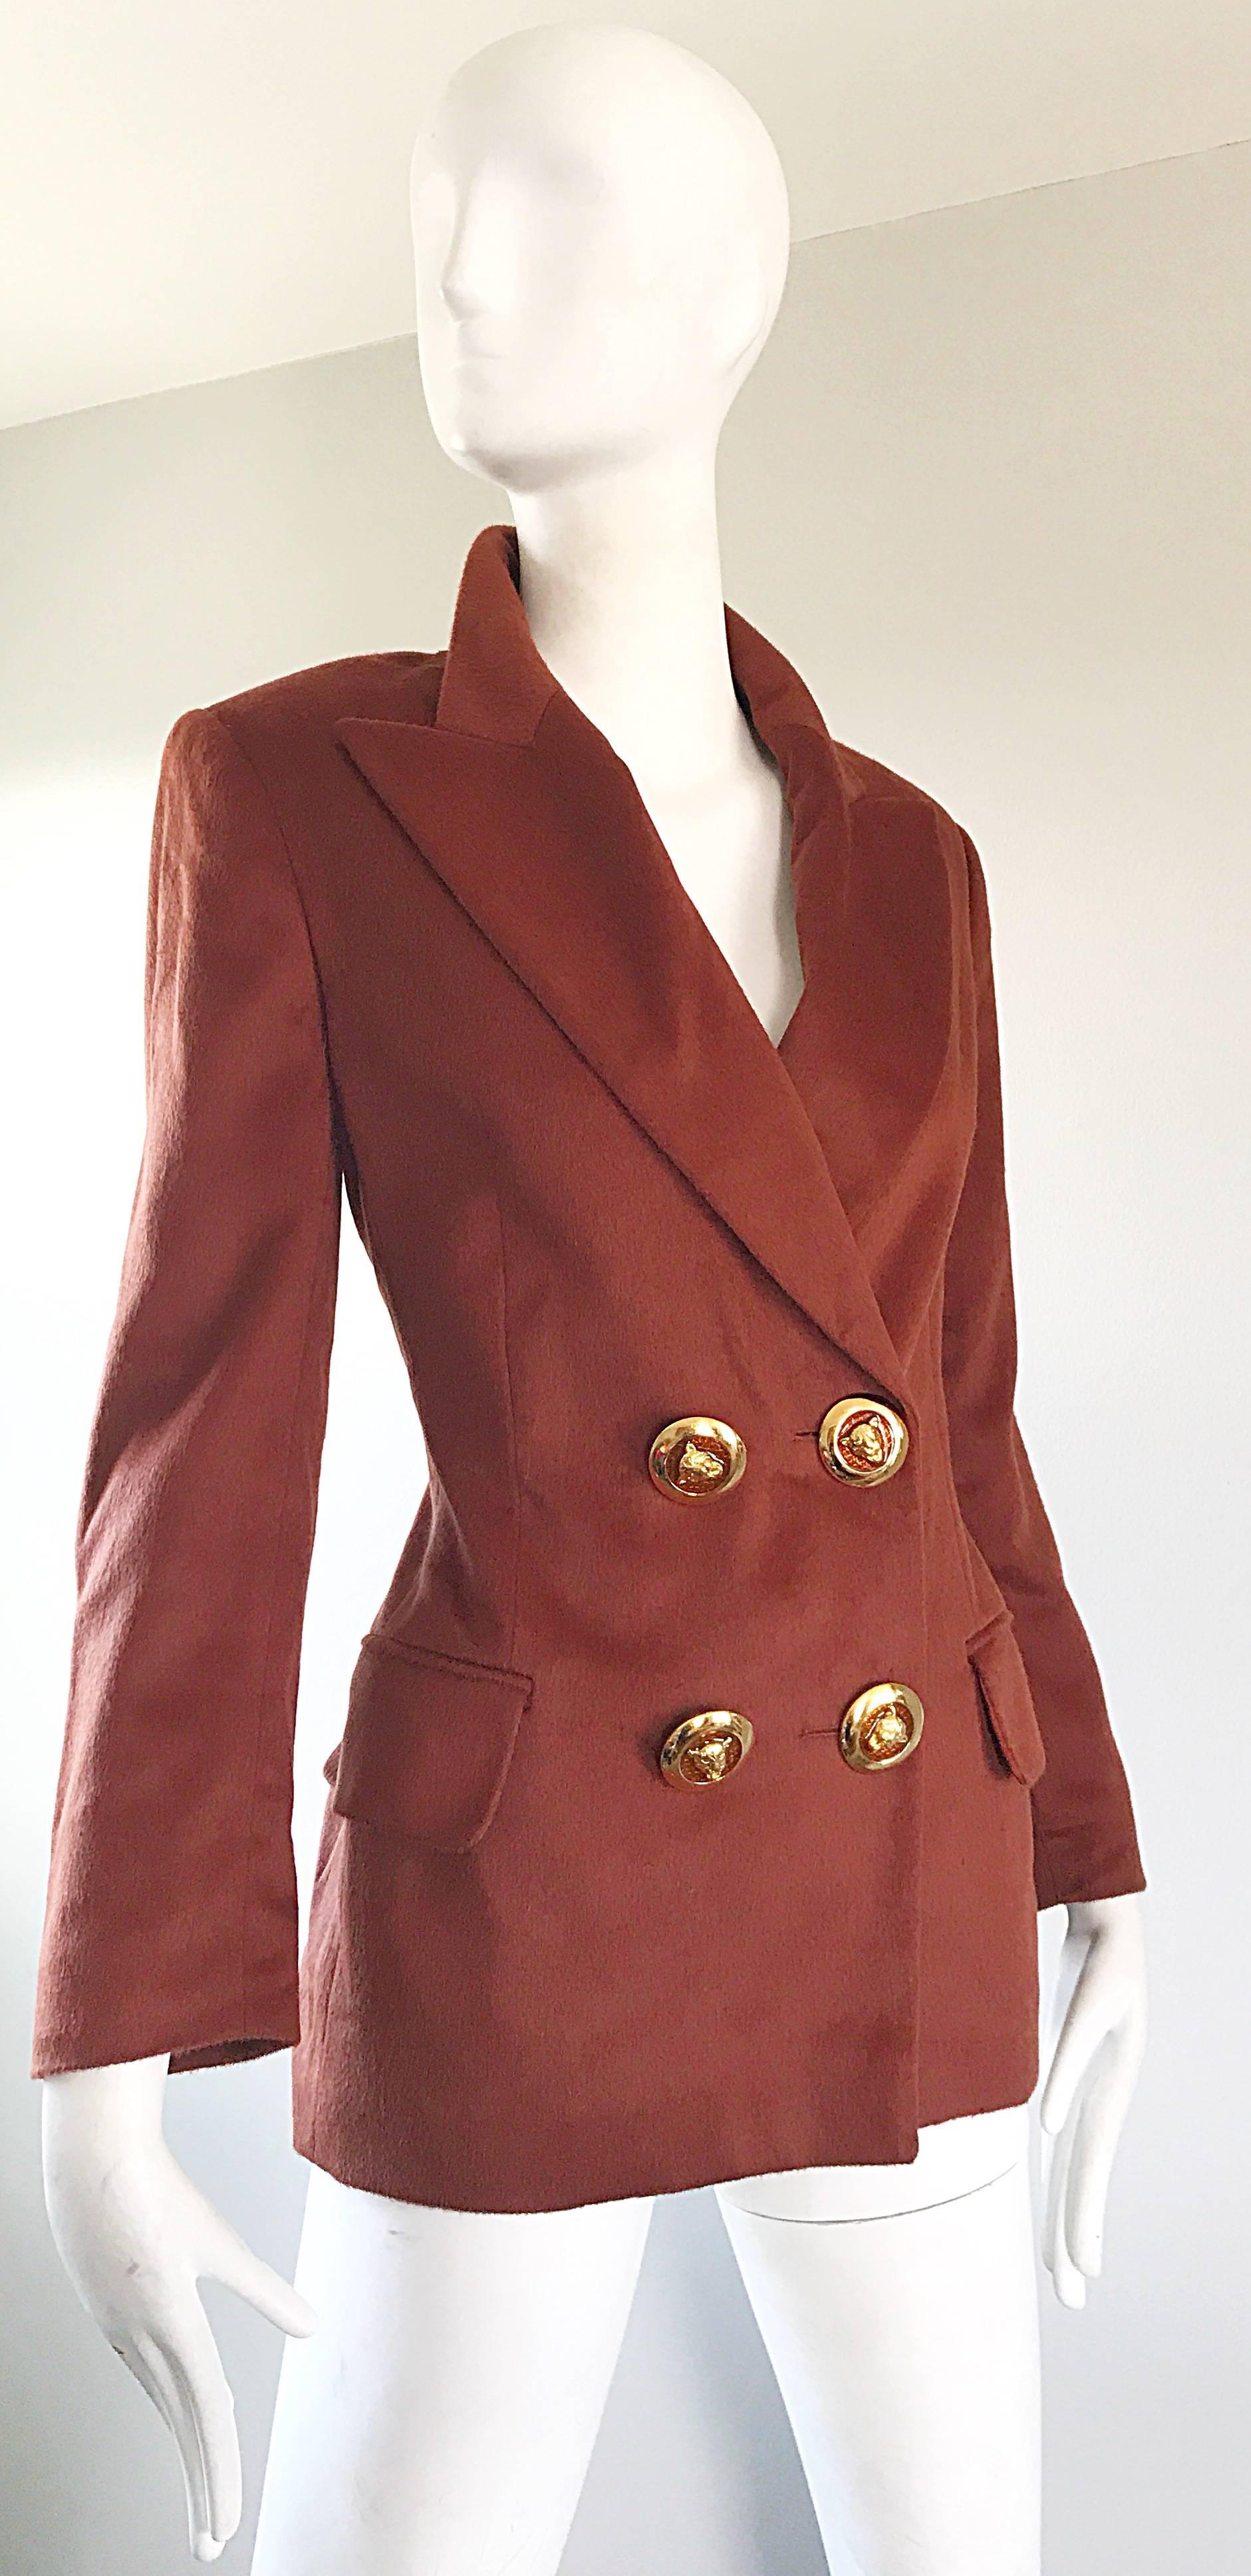 Chic, with a twist, 1990s ESCADA by MARGARETHA LEY rust / brown colored double breasted boyfriend blazer jacket! Features four large gold and amber lion head buttons on the front. Hidden interior buttons for extra support. Pockets at each side of